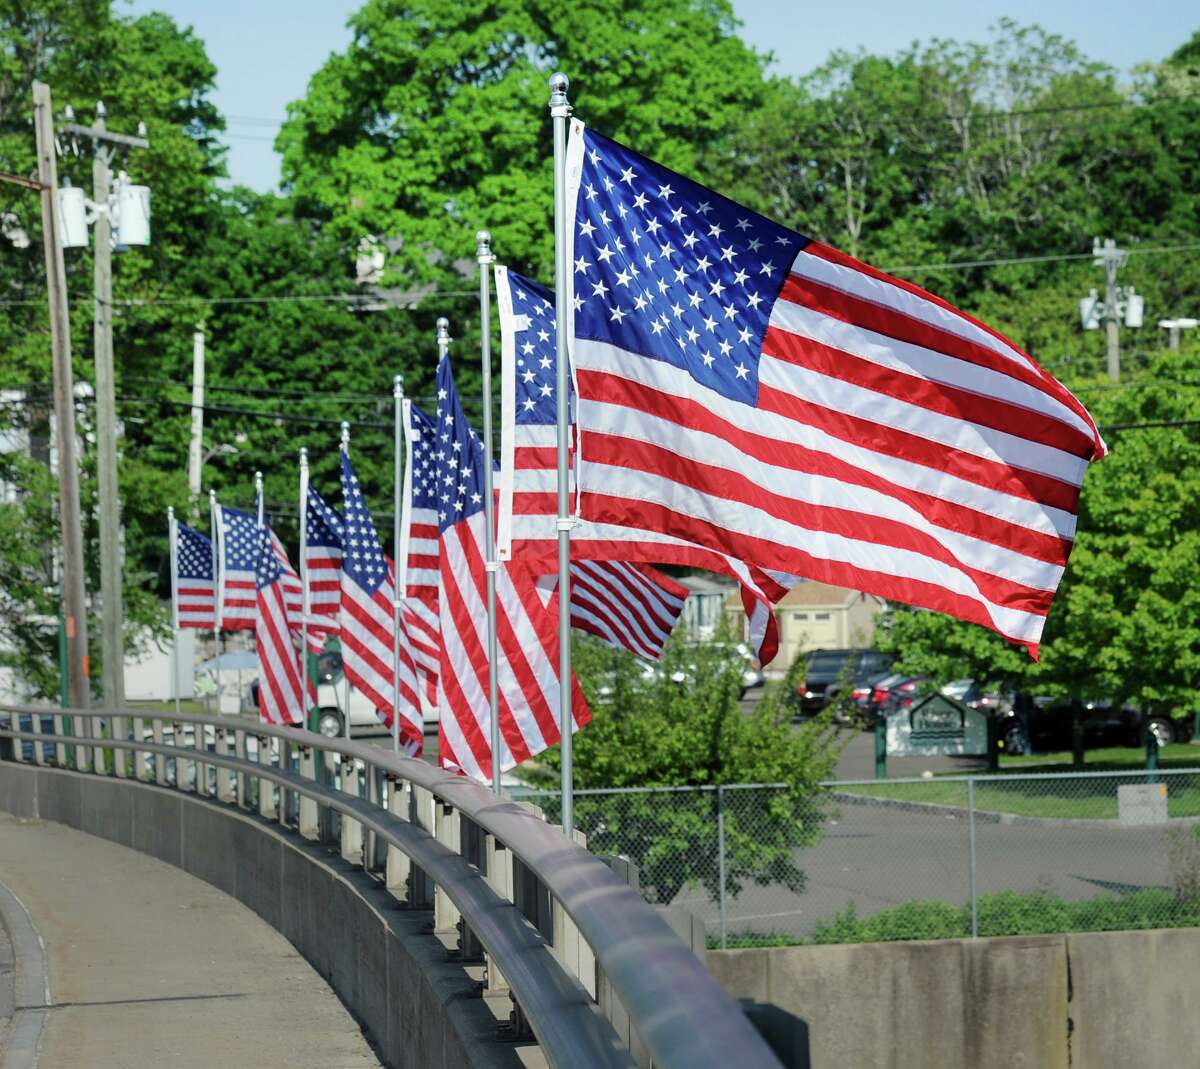 The American flags are up on the David N. Theis Memorial Bridge that spans the Mianus Waterway in Greenwich, Conn., Friday, May 25, 2018. A similar program could be coming to Greenwich Avenue this summer.